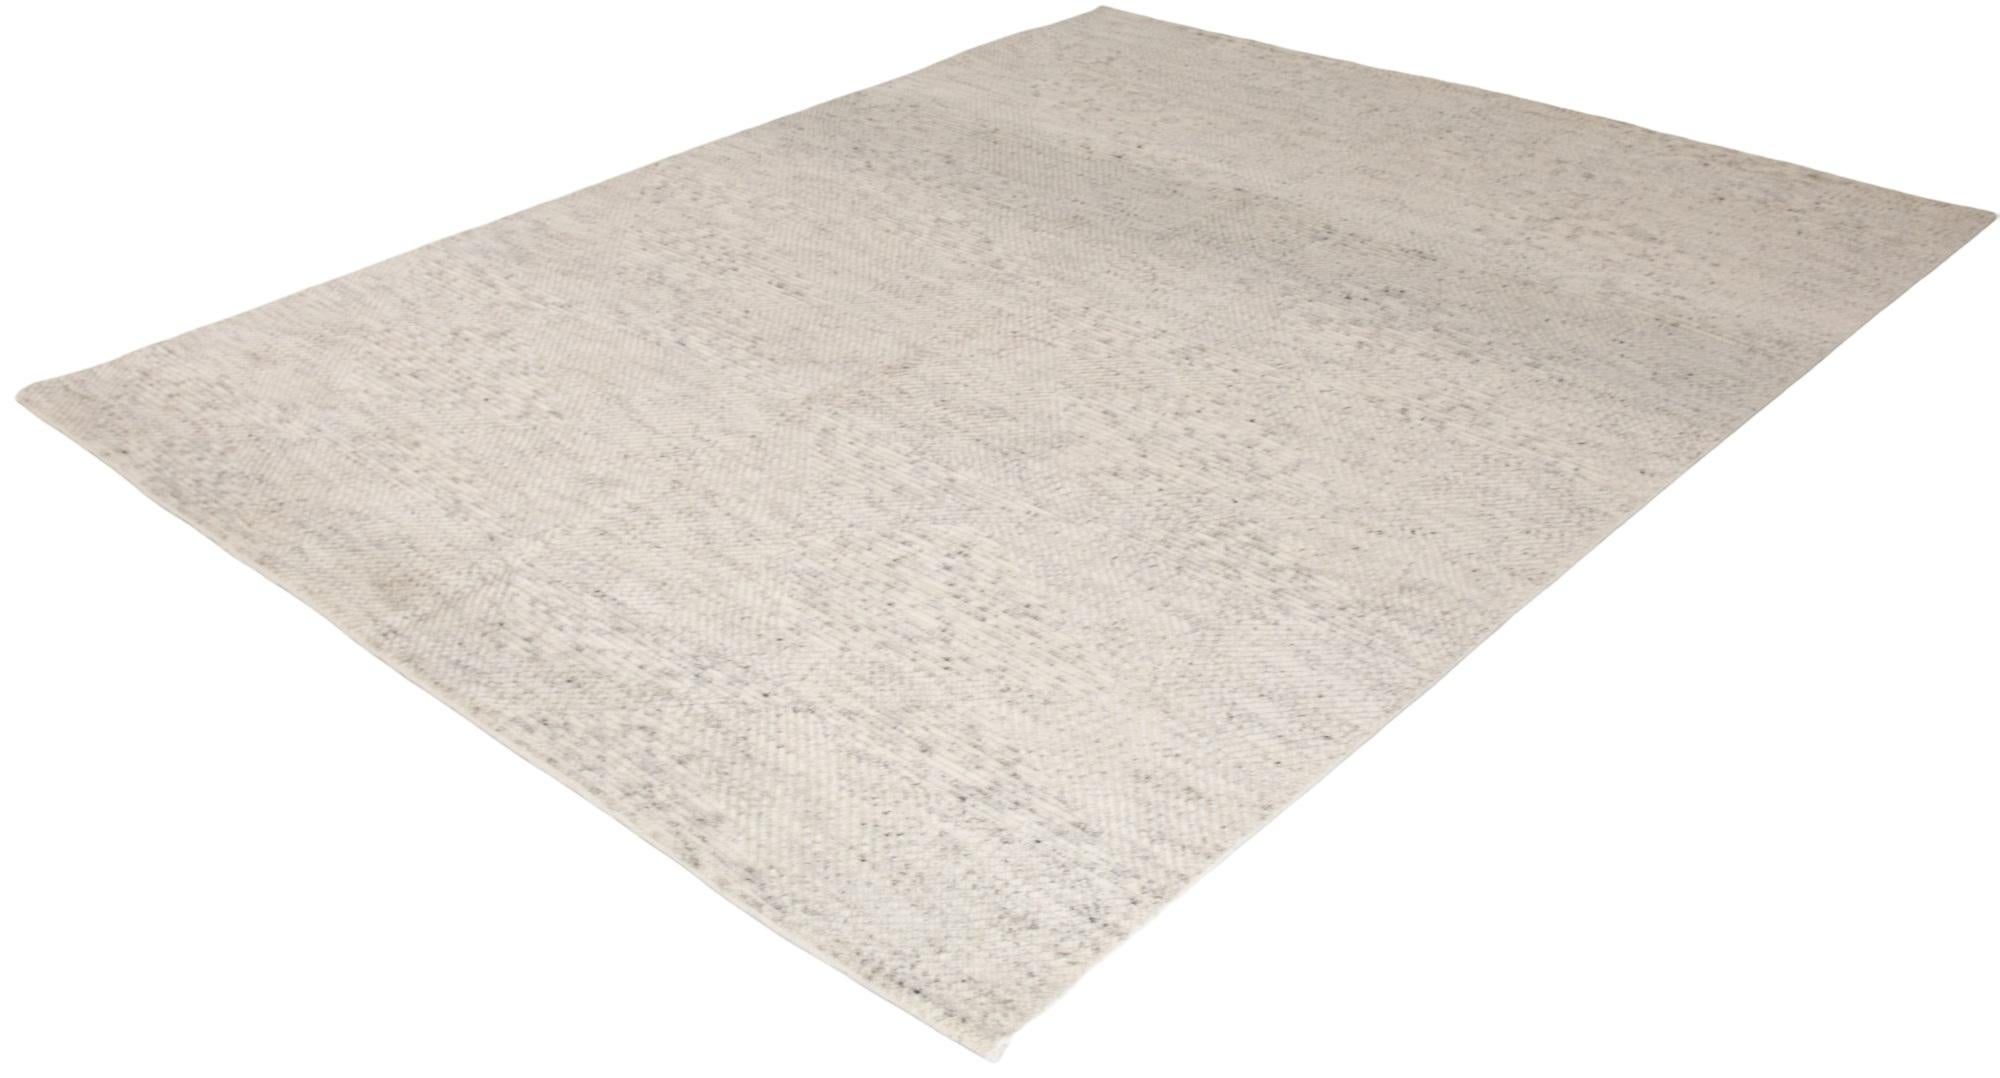 Organic Modern Contemporary Minimalist Textured Hand-Knotted Cream Beige Wool Rug For Sale